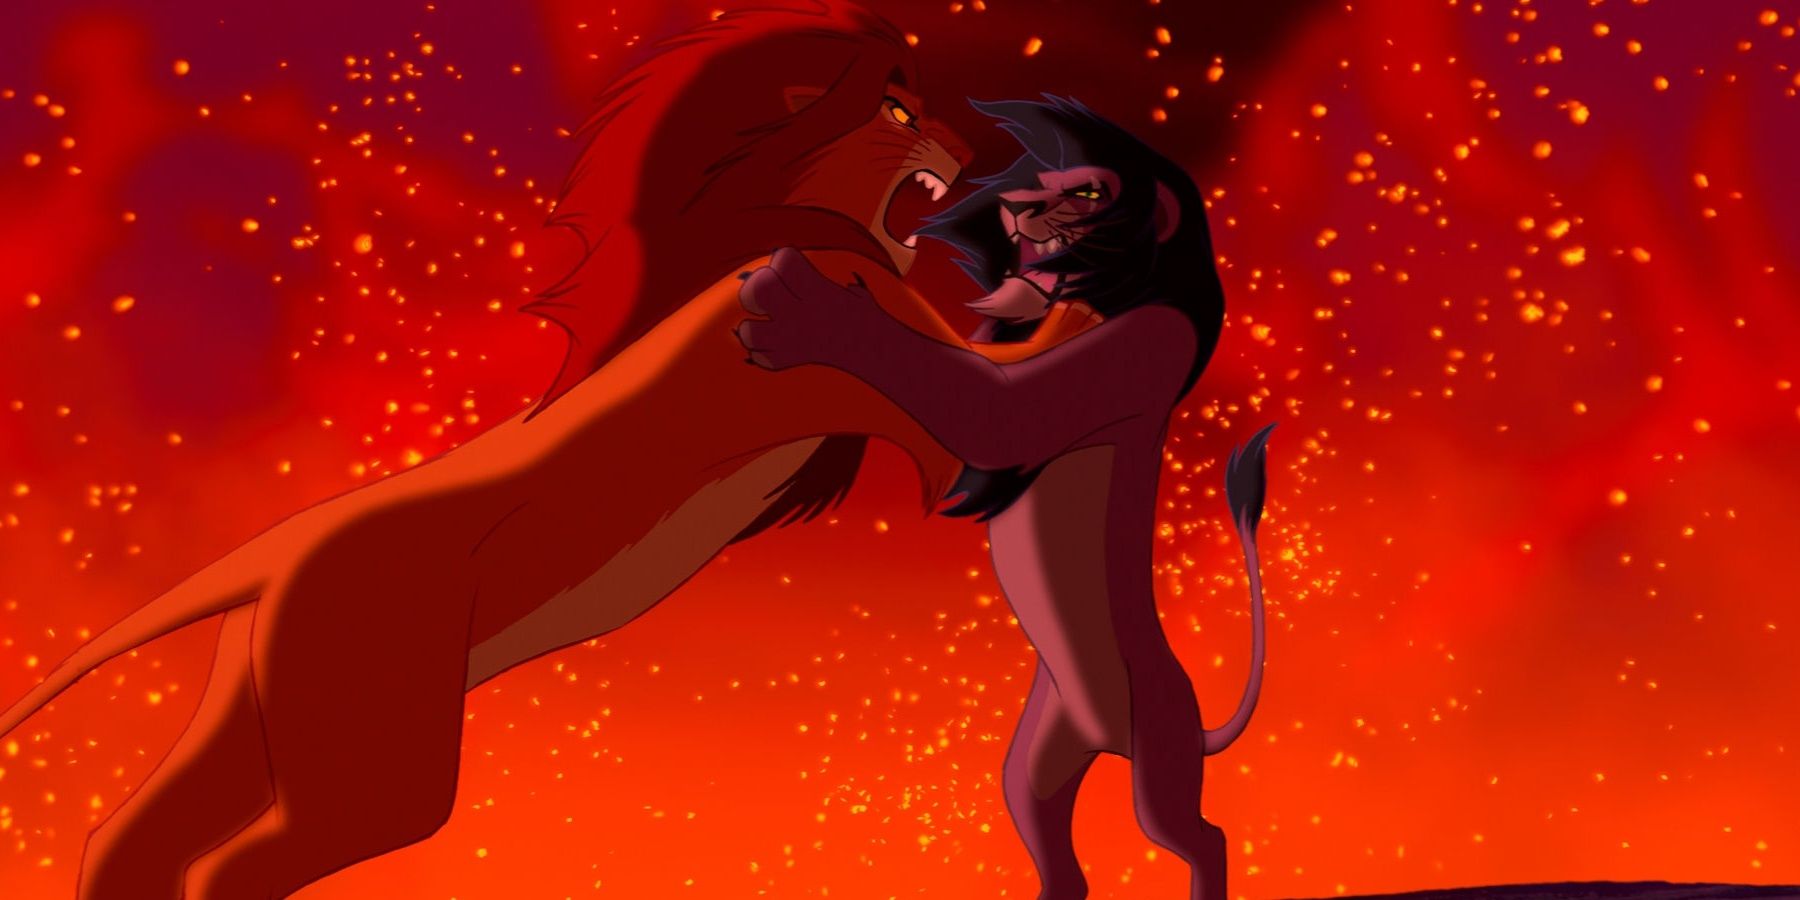 4 Reasons The Lion King LiveAction Is The Best (& 6 Reasons Its The Original)